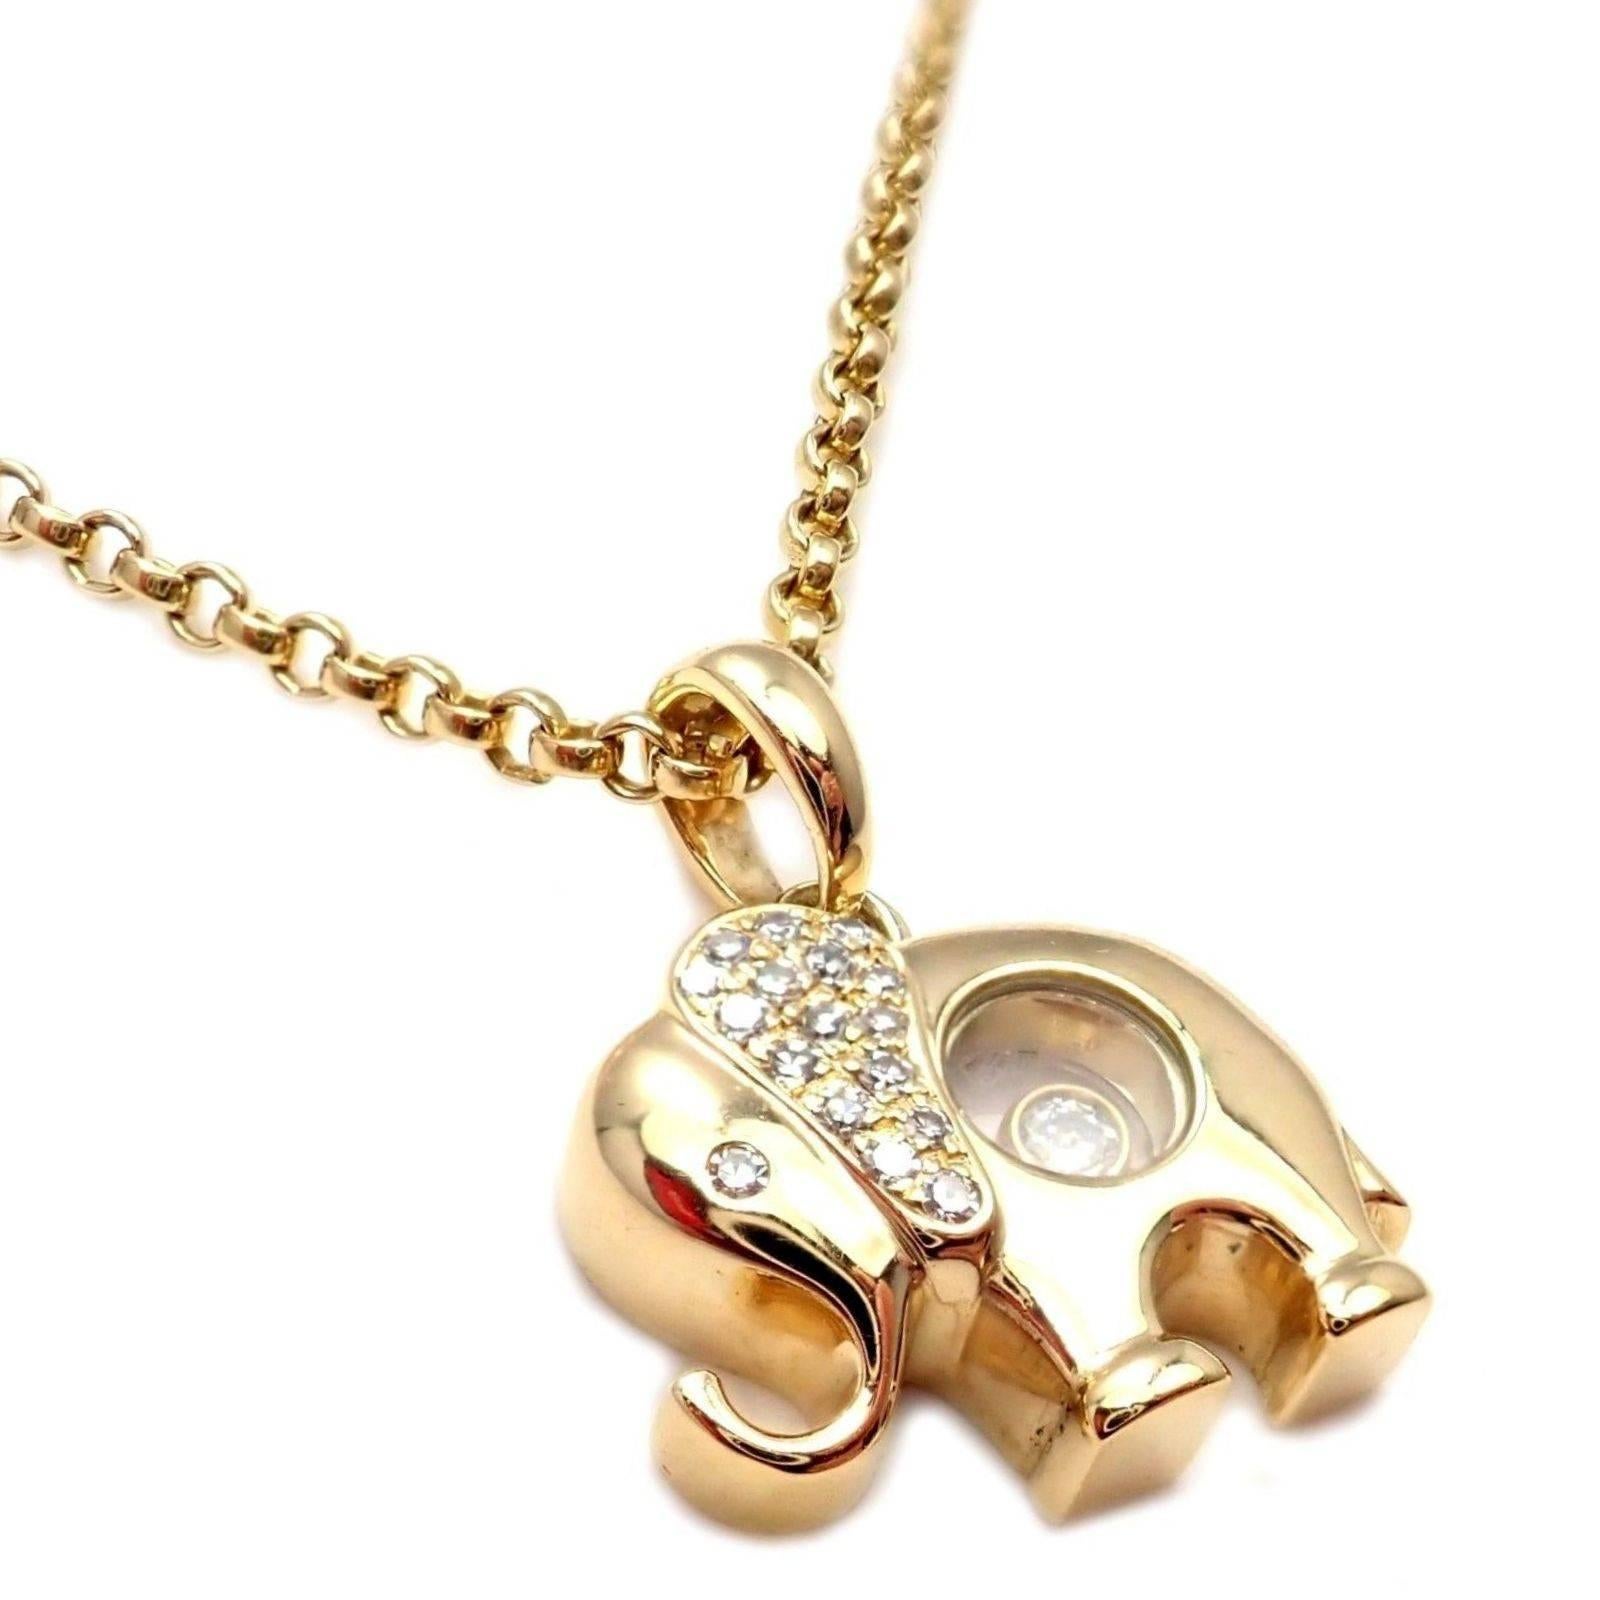 18k Yellow Gold Happy Elephant Diamond Pendant Necklace by Chopard.  
With 17 Round Brilliant Cut Diamonds VS1 total weight approx. .16ct
Details:  
Length: 17.5